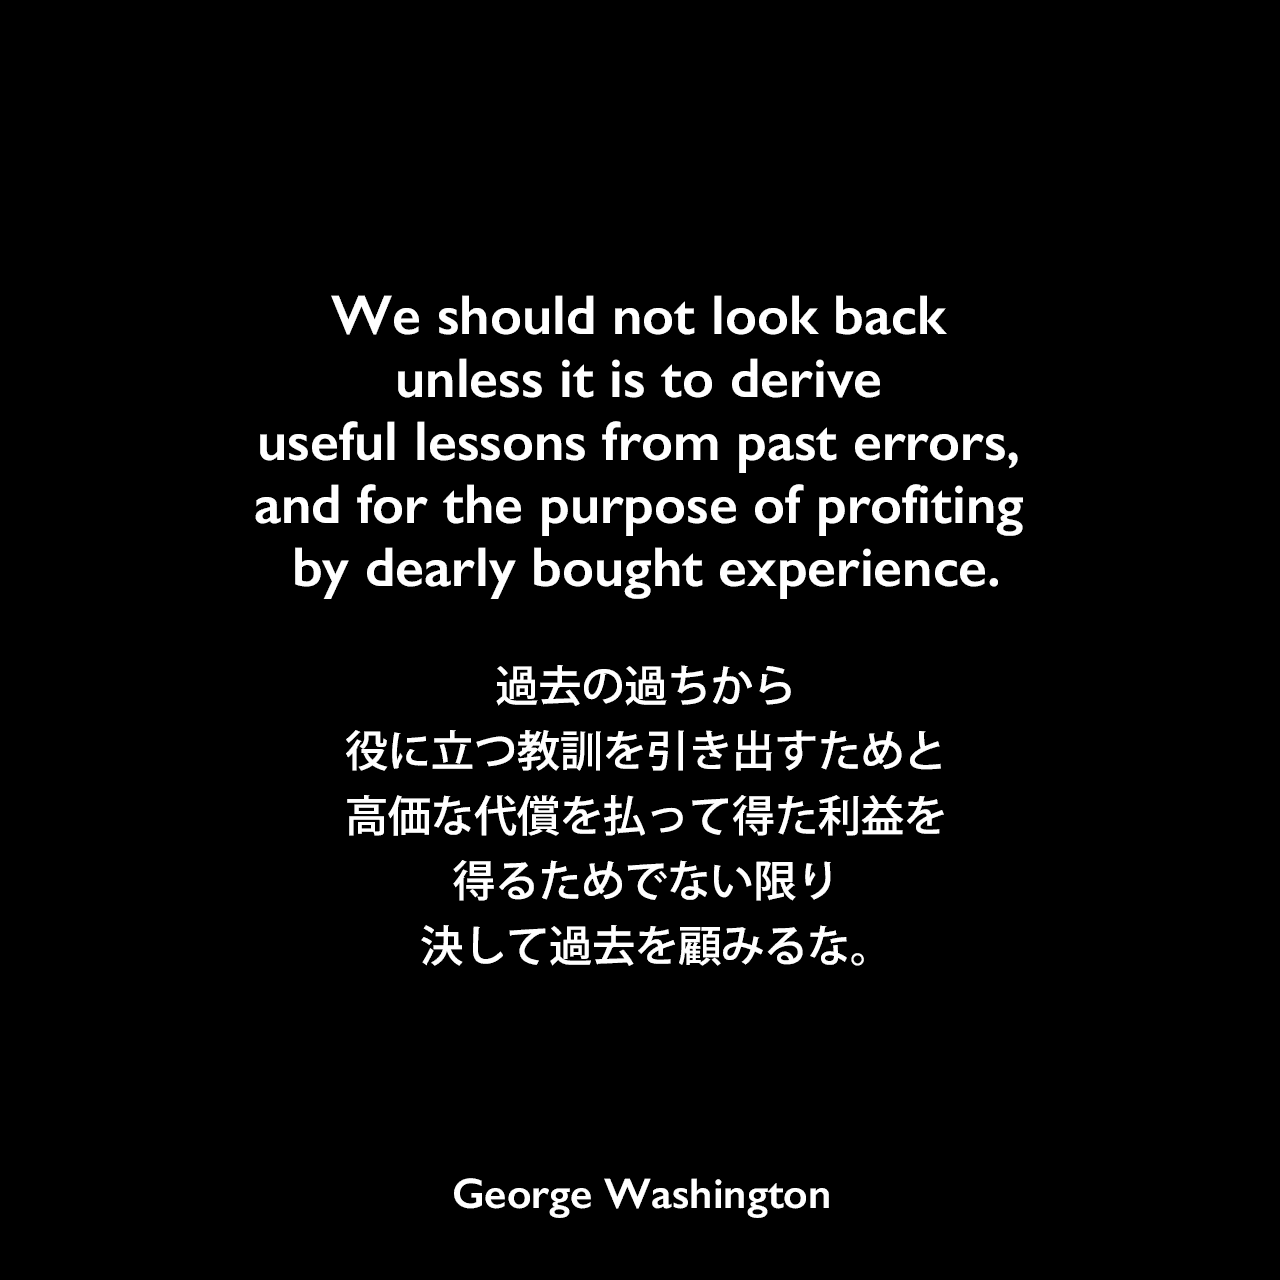 We should not look back unless it is to derive useful lessons from past errors, and for the purpose of profiting by dearly bought experience.過去の過ちから役に立つ教訓を引き出すためと、高価な代償を払って得た利益を得るためでない限り、決して過去を顧みるな。George Washington